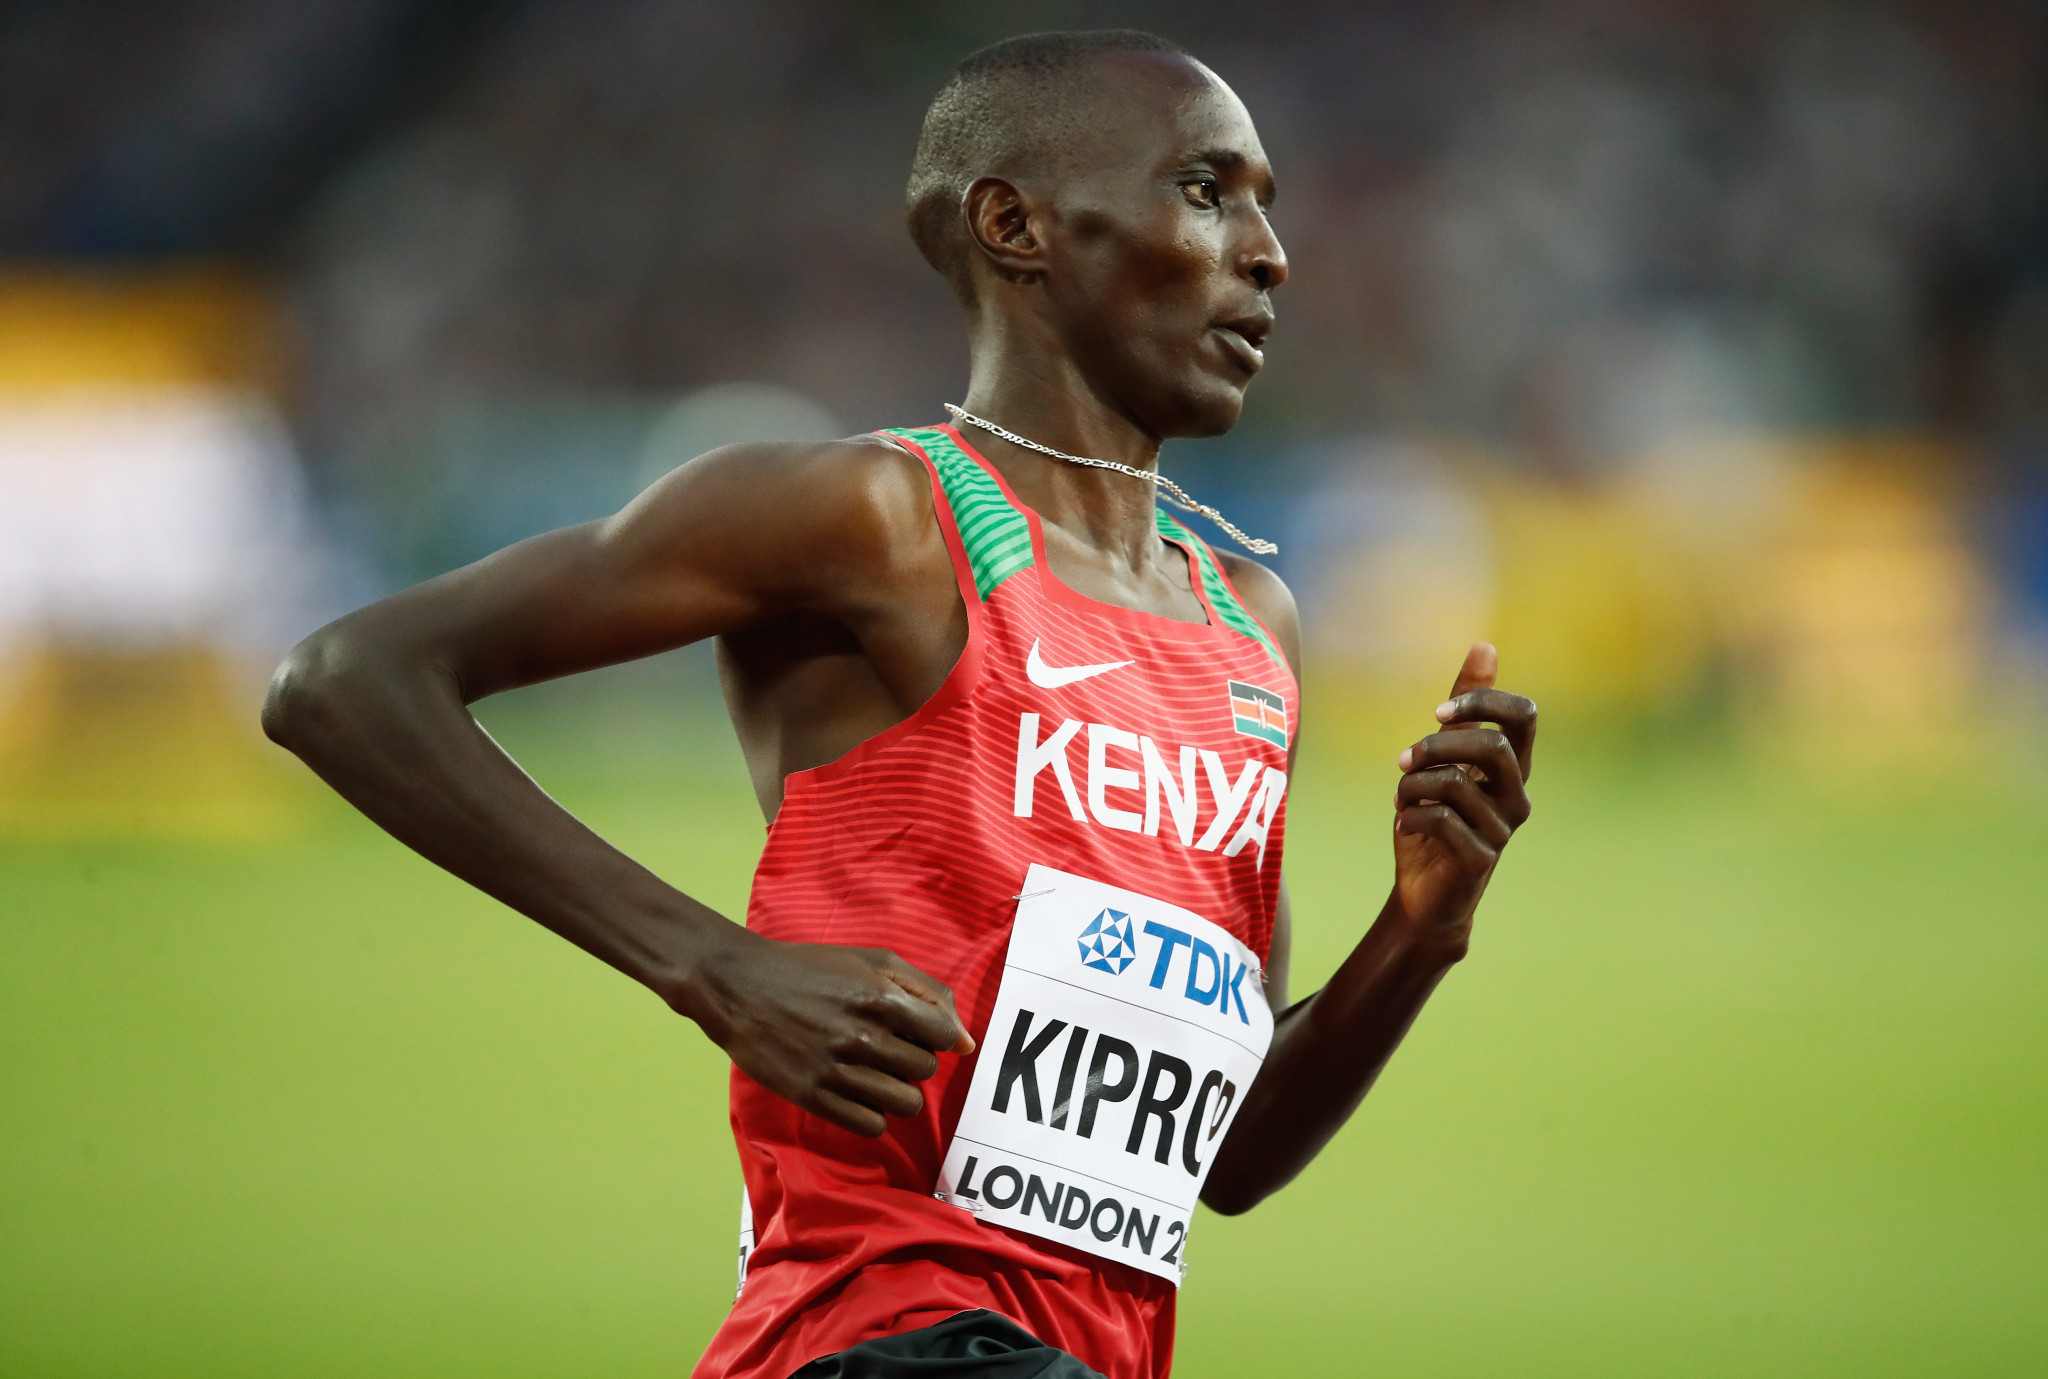 Kiprop claims to be "devastated" by positive test for EPO